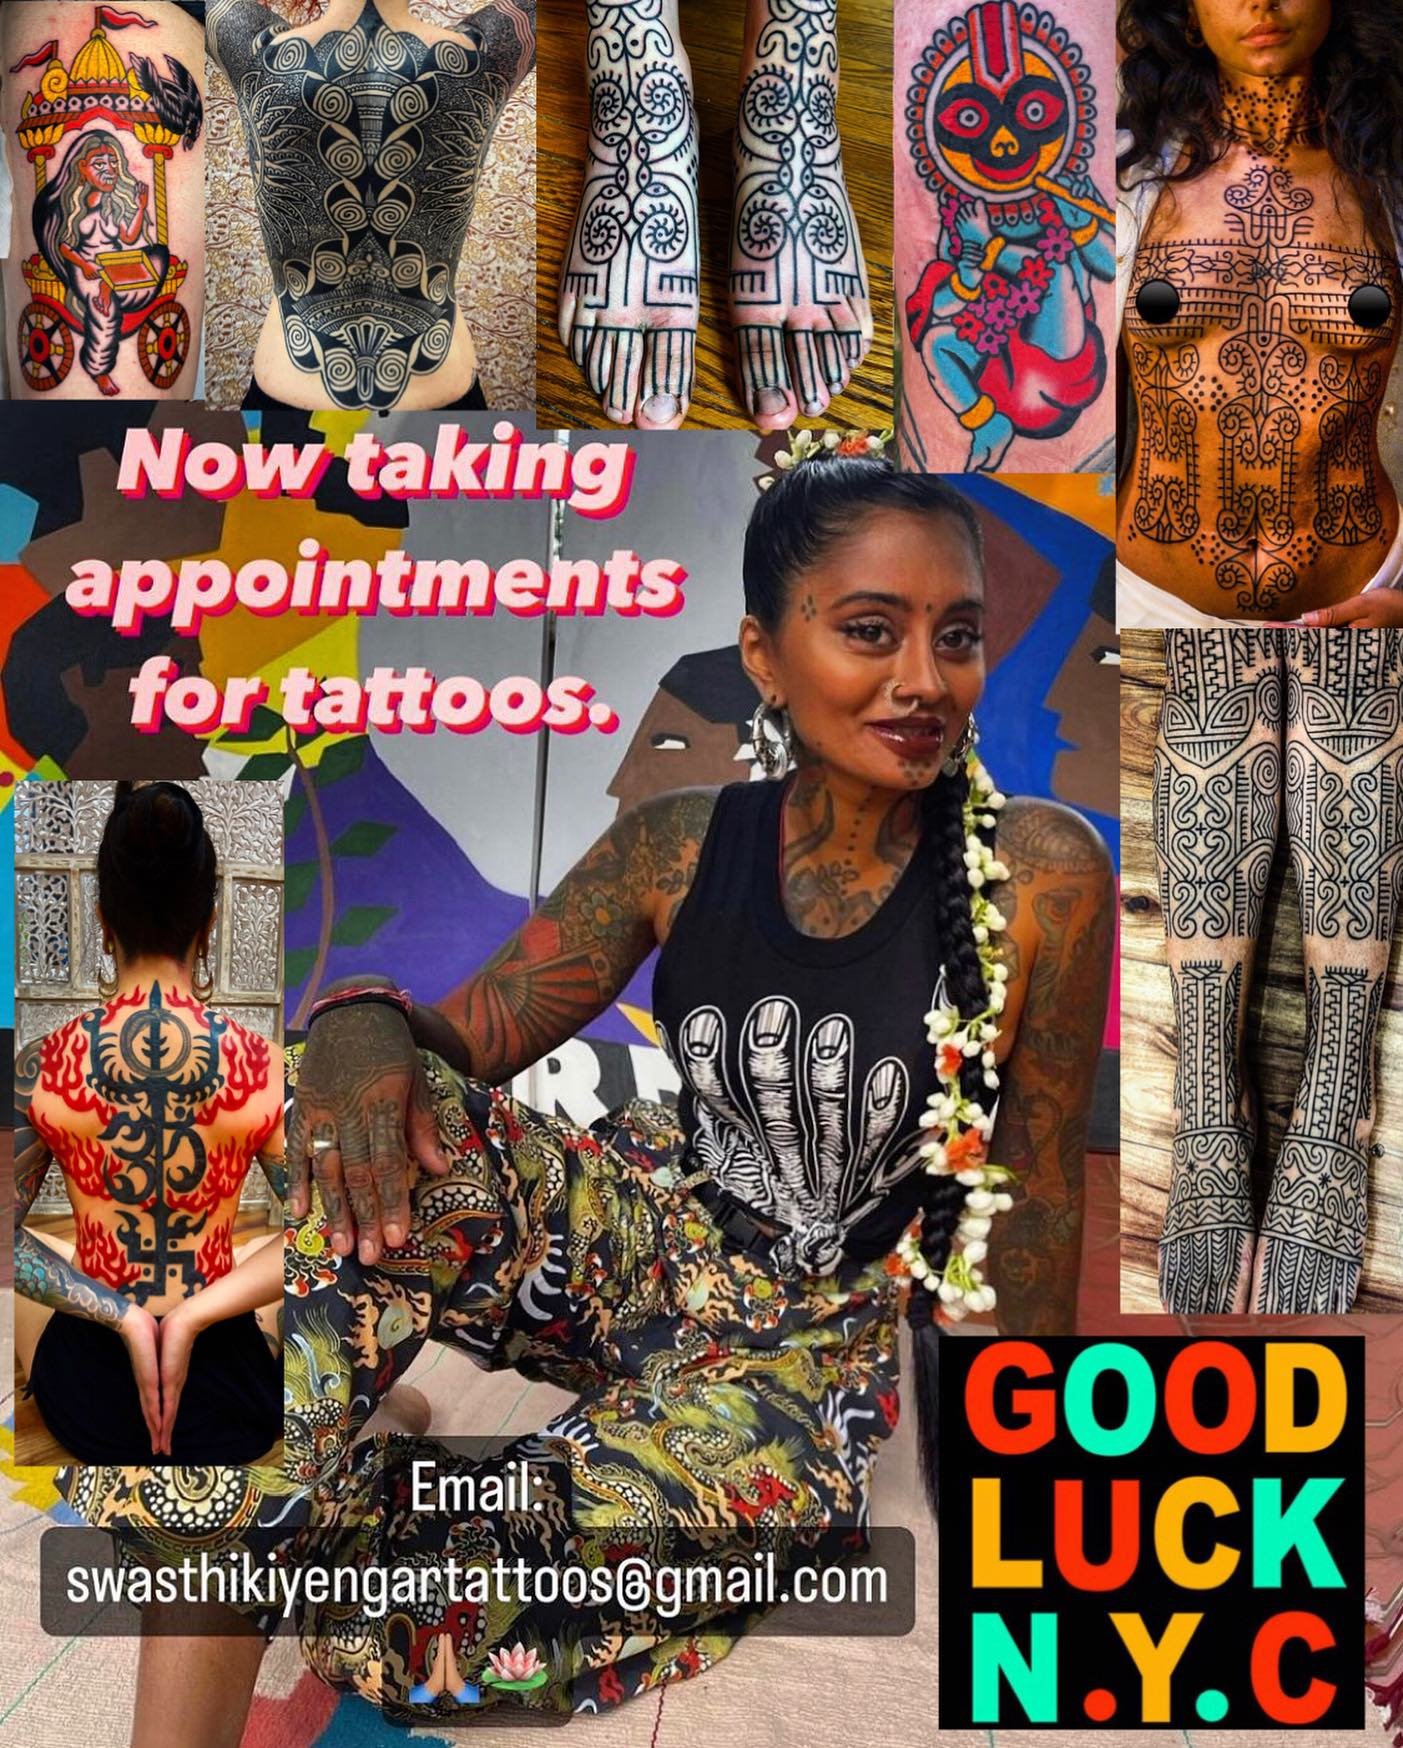 Please welcome are new resident artist @gunga_ma !! Starting tomorrow and working Tues-Wed &amp; Fri-Sat here at #goodlucknyc in beautiful #greenpoint 

For tattoos please 📩 swasthikiyengartattoos@gmail.com